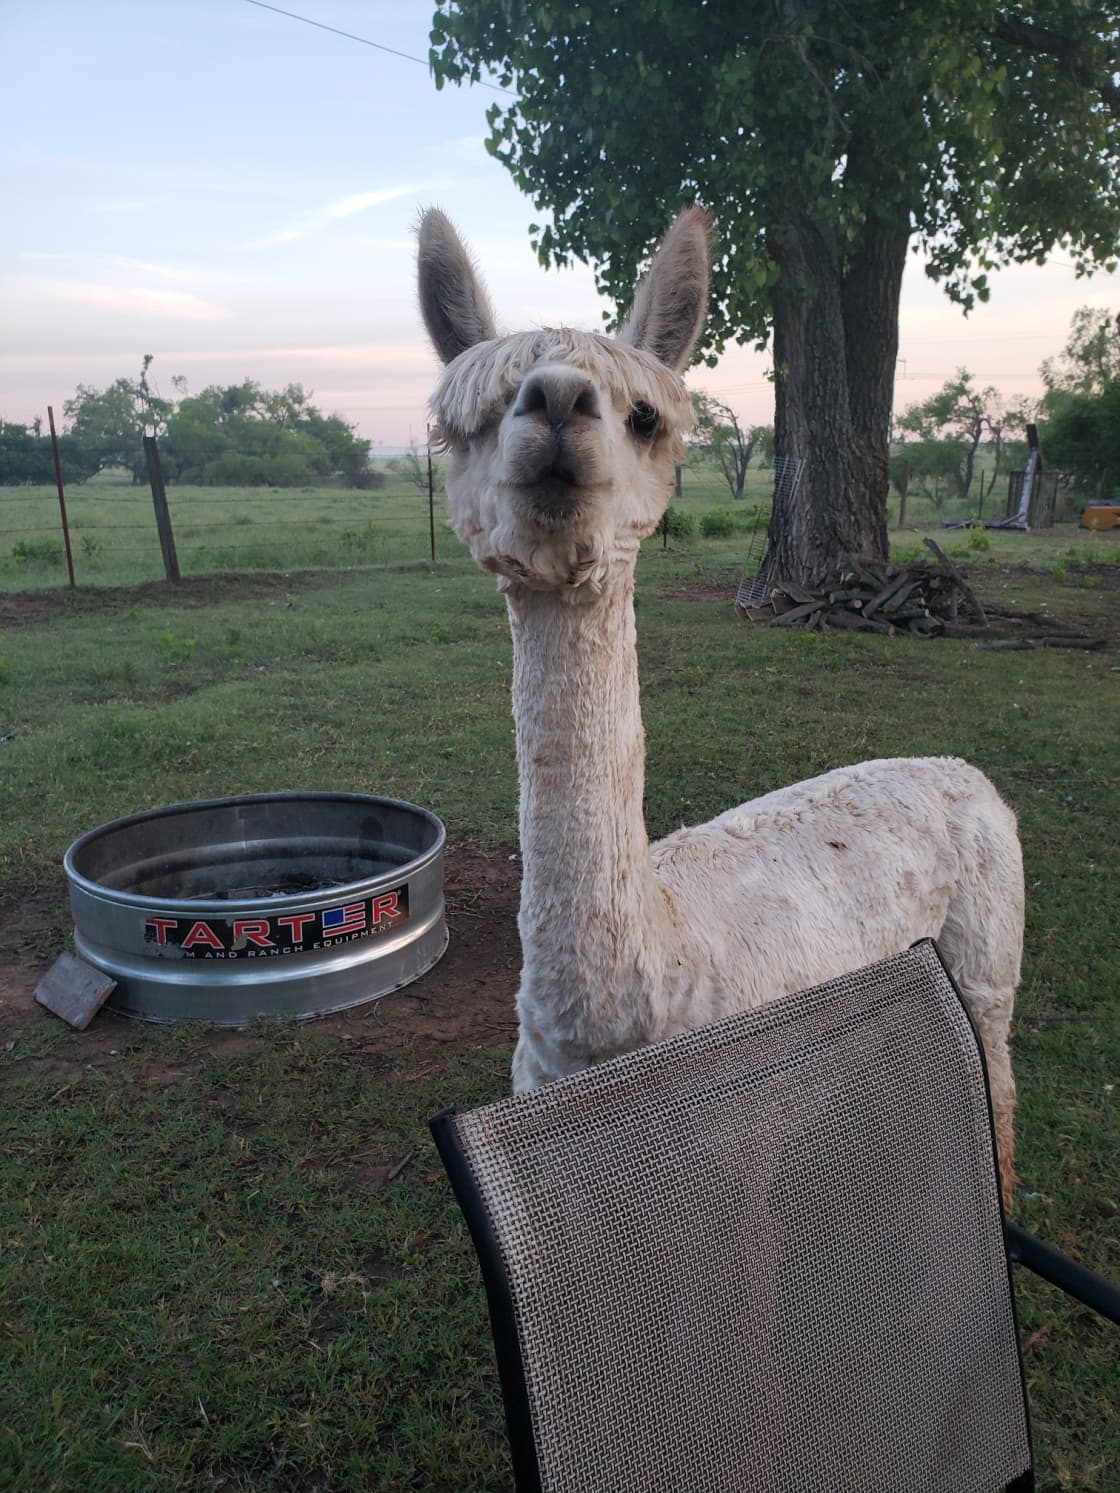 McBeth is so friendly, and nosy... a great cute Alpaca that wanted to hang out with us